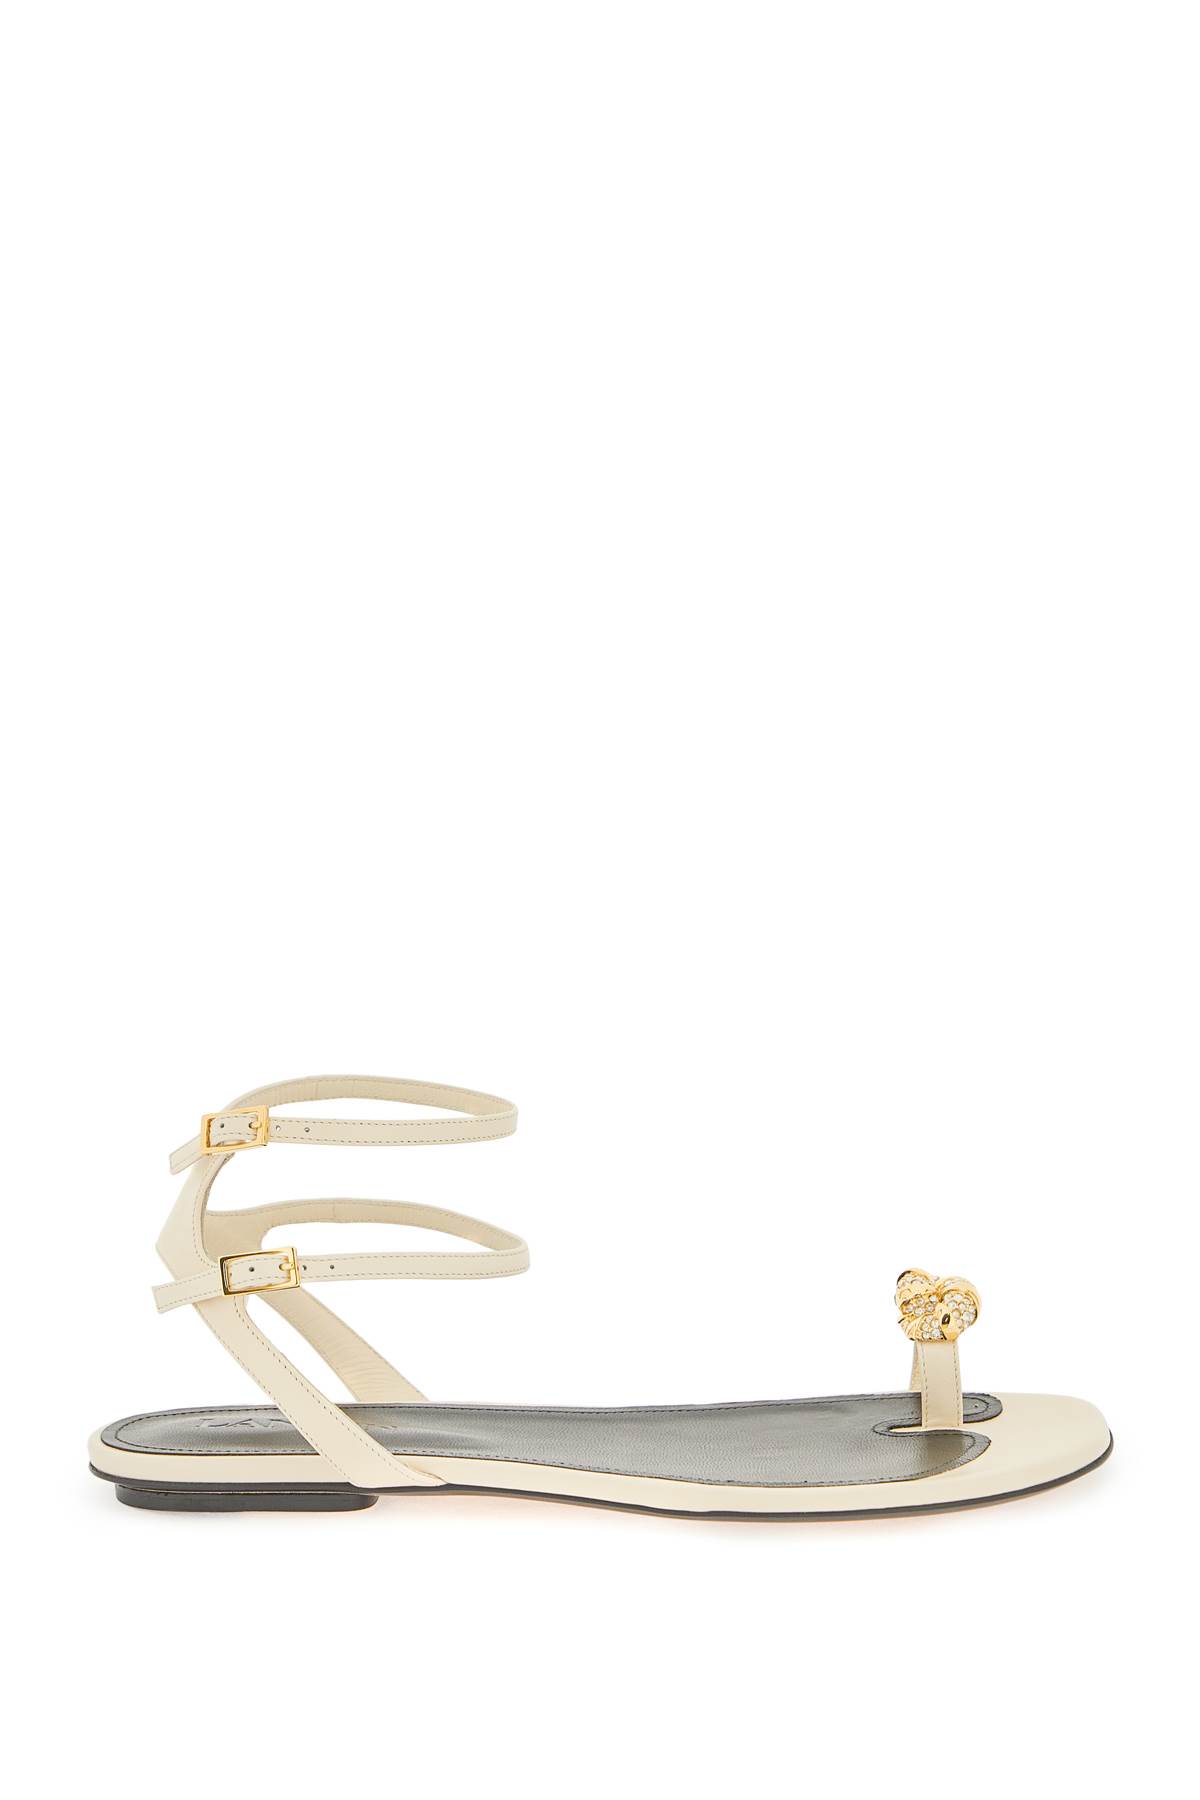 LANVIN SWING LEATHER LOW SANDALS WITH MELODIE JEWEL